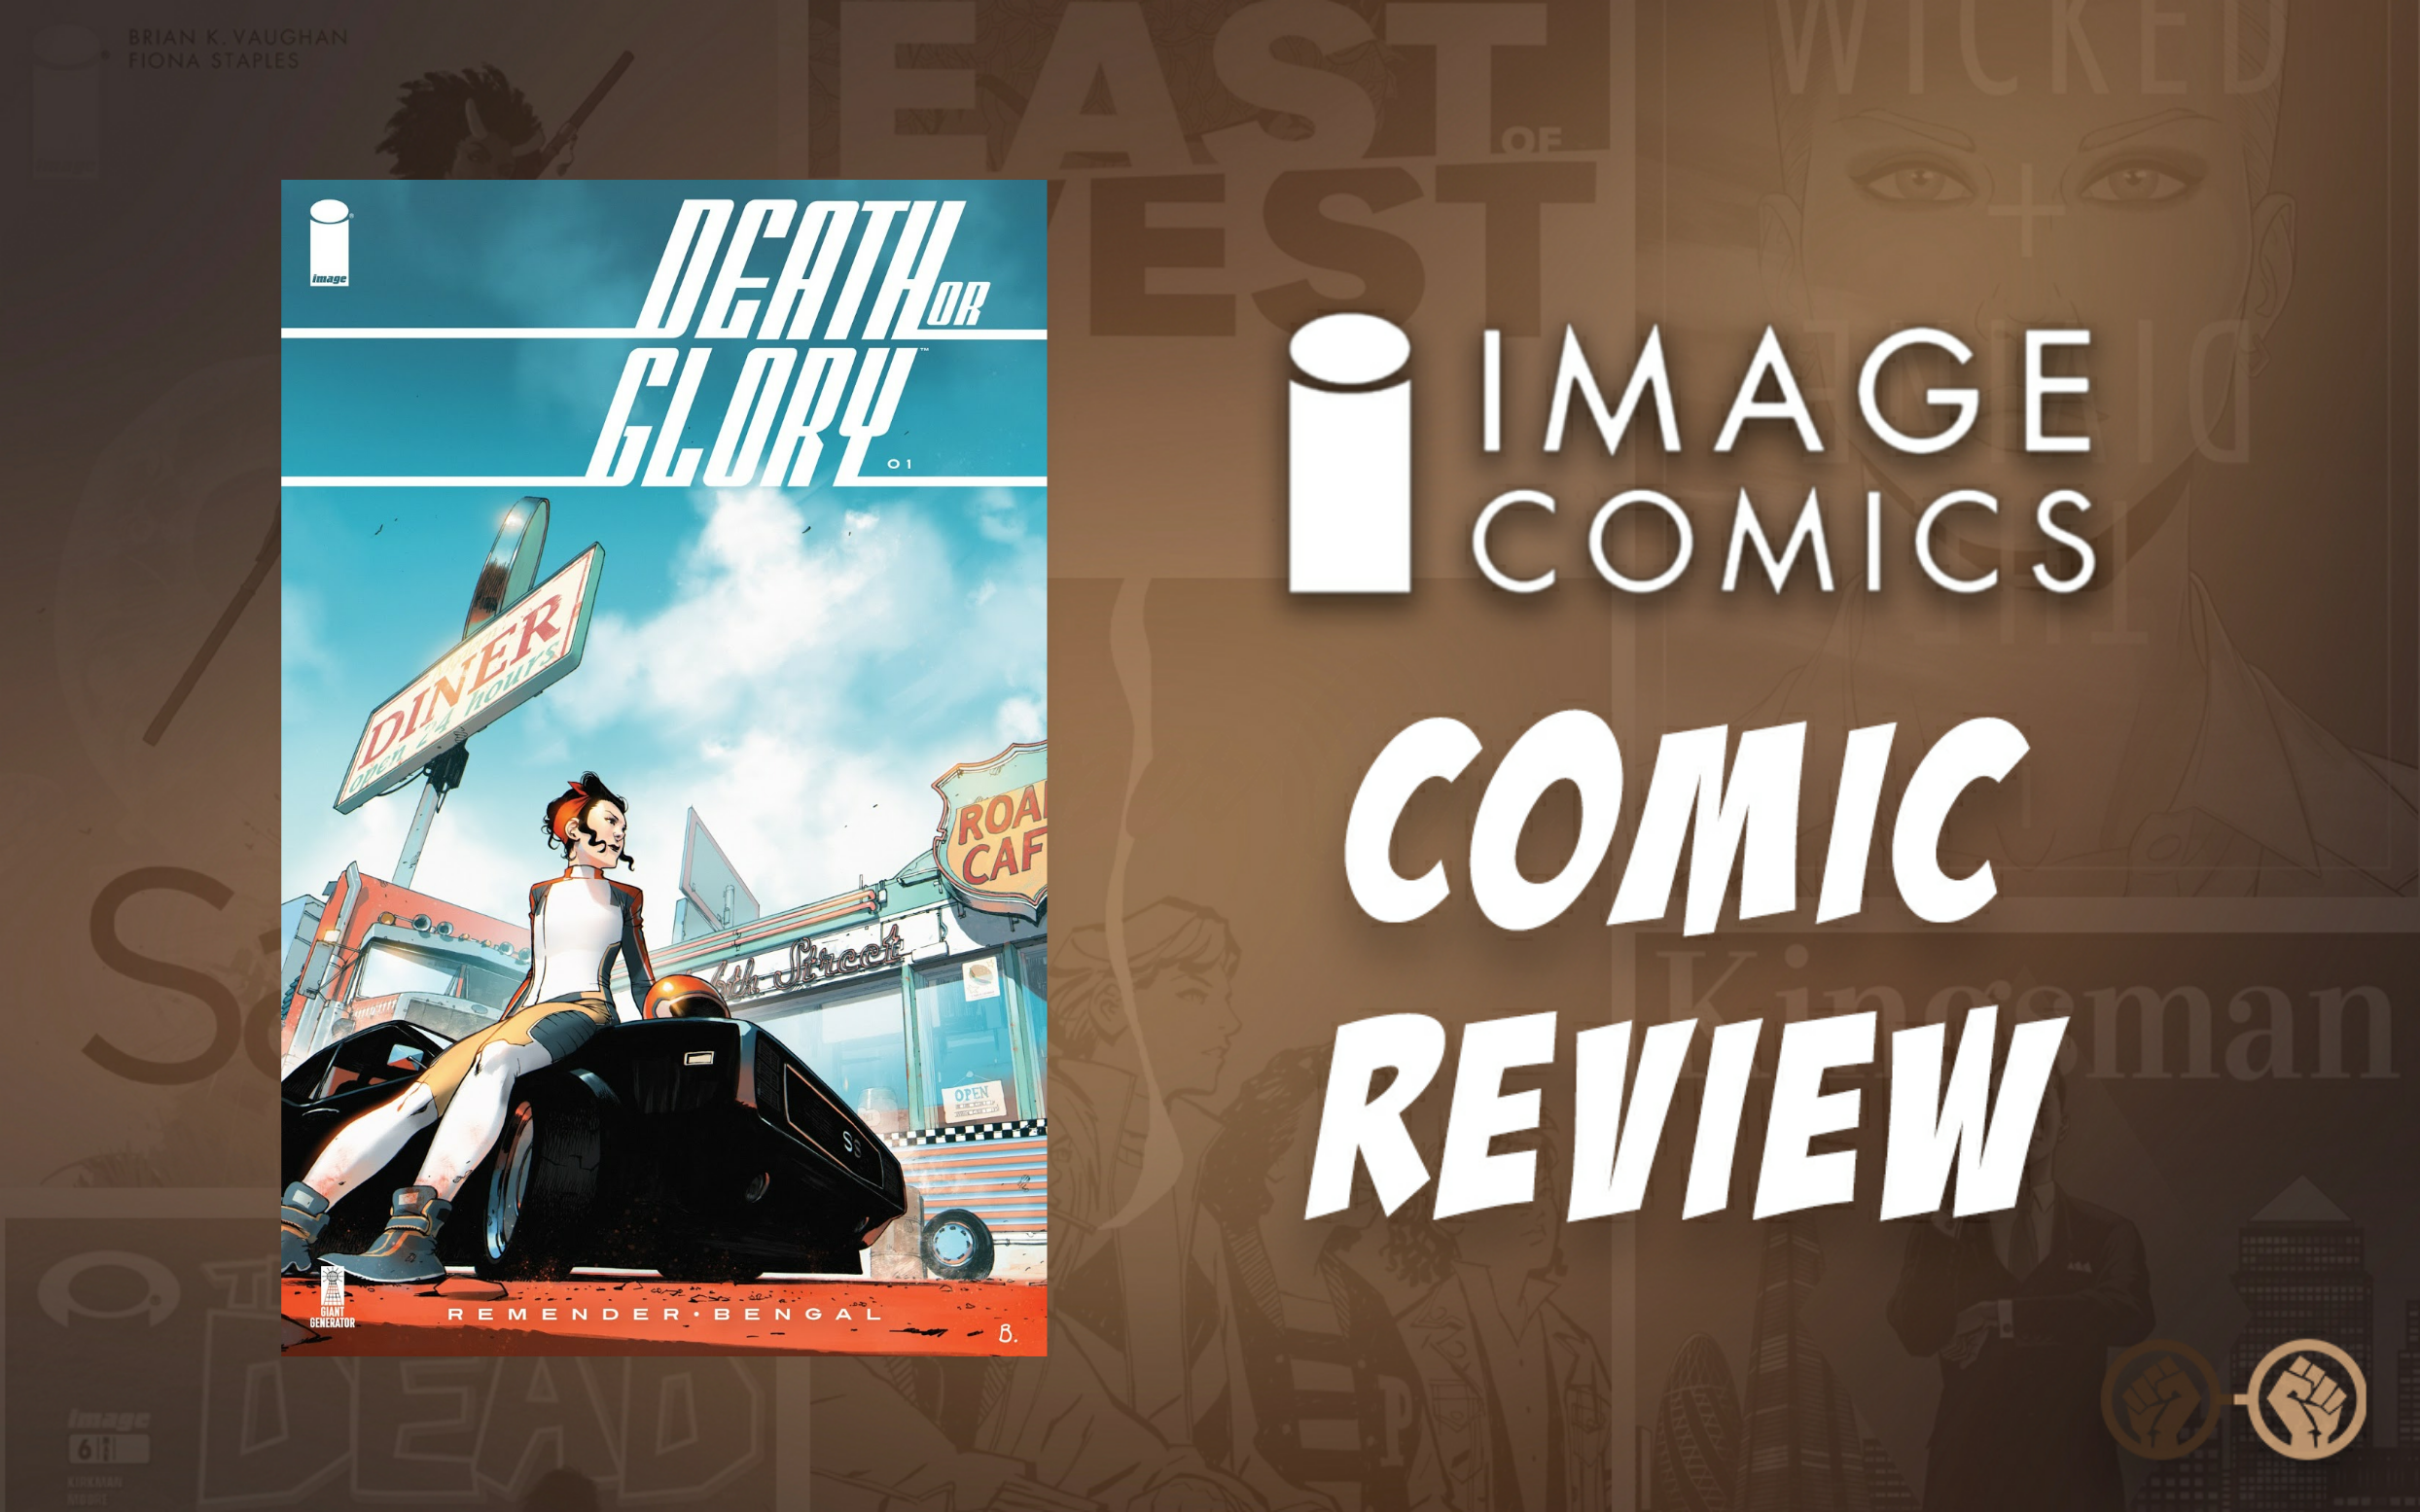 GoC Comic Review: Death or Glory #1